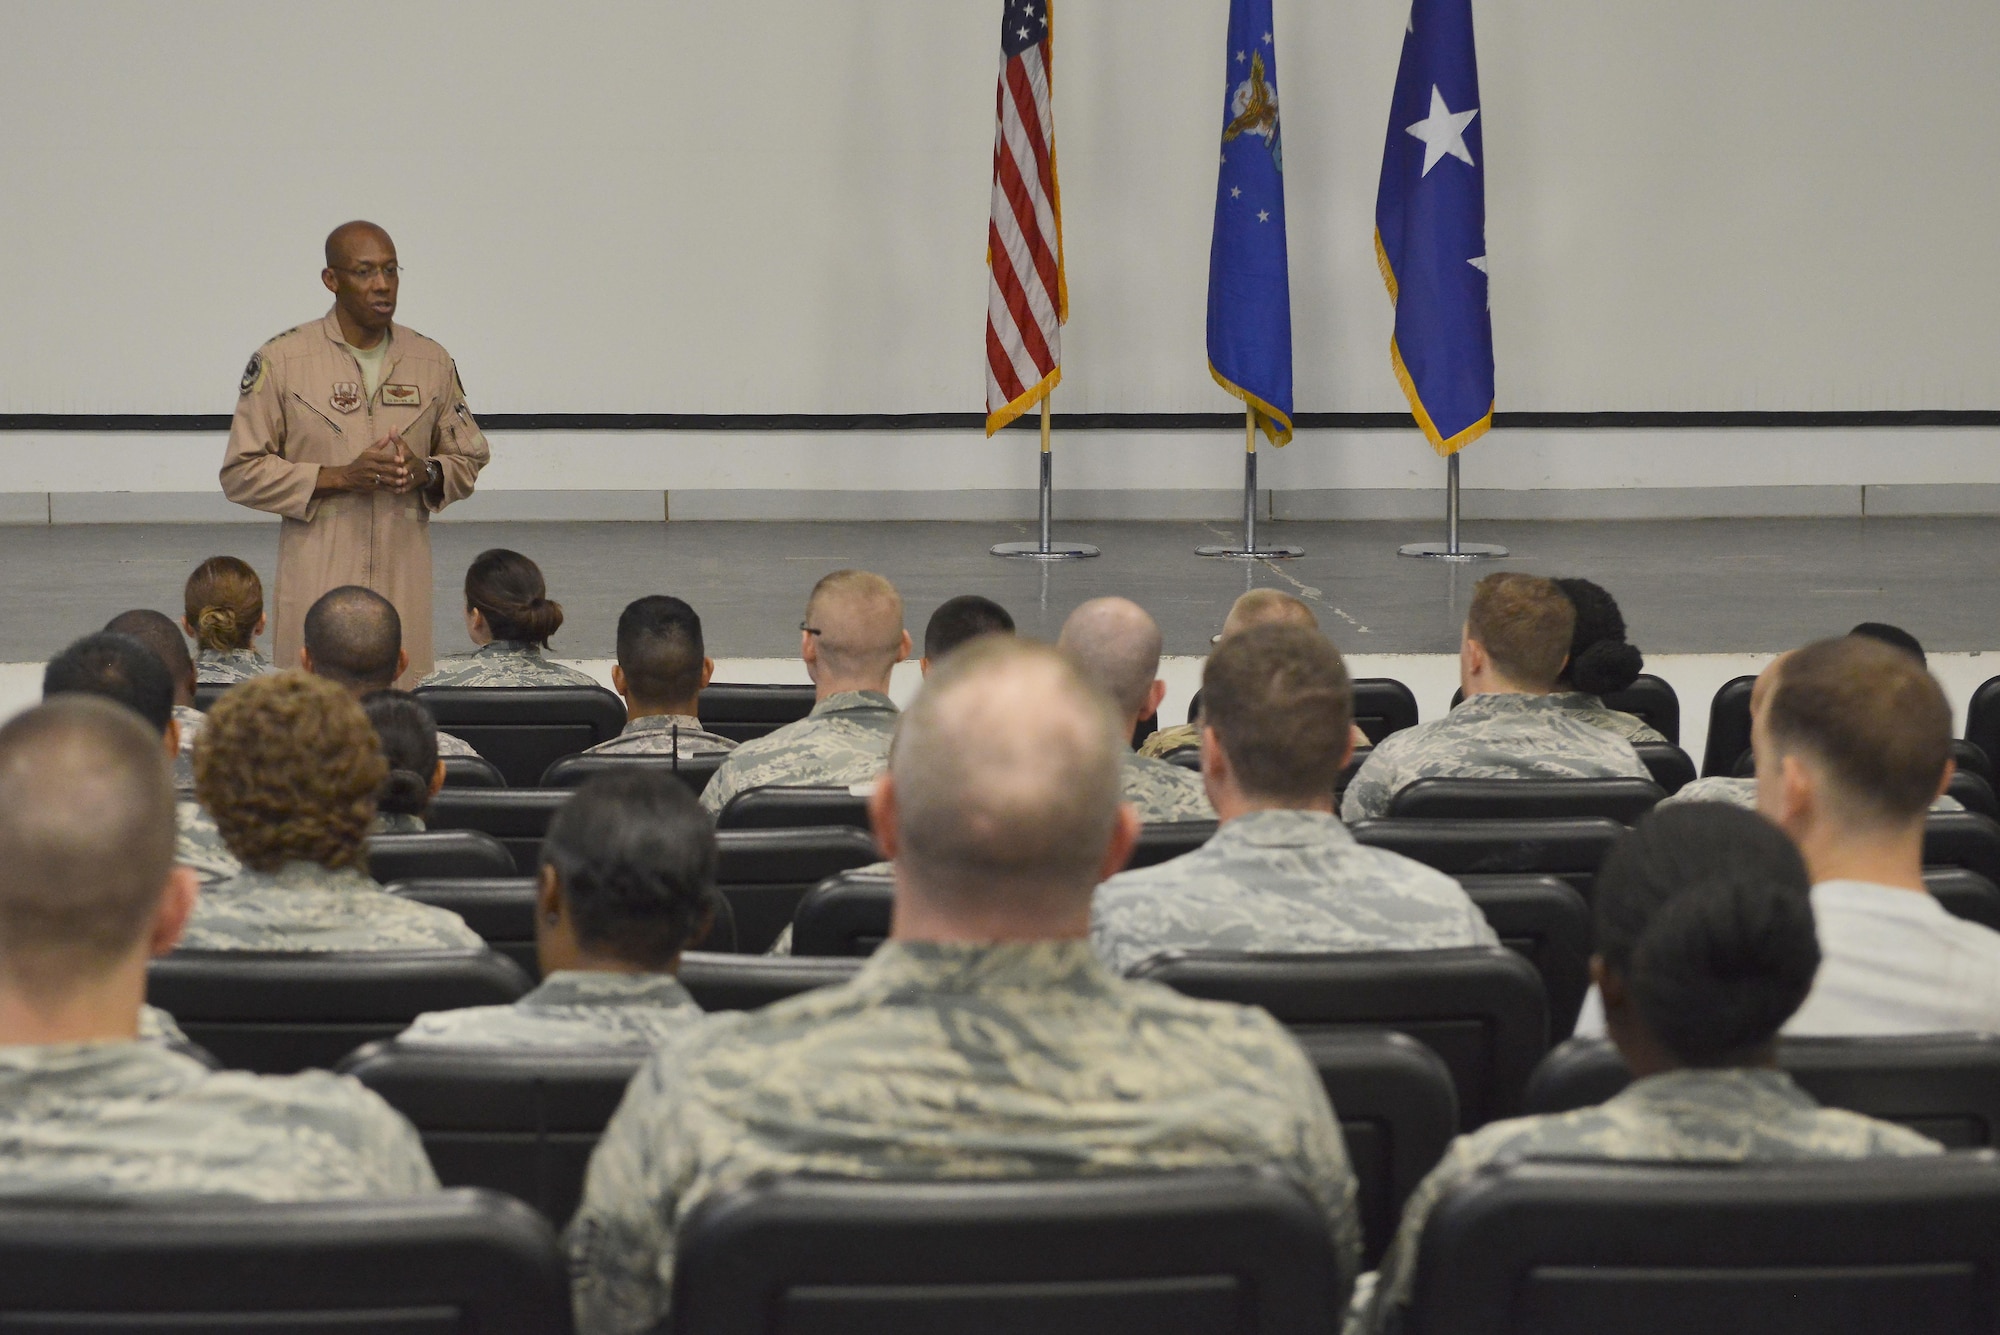 Lt. Gen. CQ Brown Jr., U.S. Air Forces Central Command commander, speaks to Al Udeid key personnel volunteers for the Combined Federal Campaign-Overseas program August 27, 2015 at Al Udeid Air Base, Qatar. CFC gives military members the opportunity to contribute through donations for various charities. The campaign will begin September 21st and conclude November 21st. (U.S. Air Force photo/Staff Sgt. Alexandre Montes)